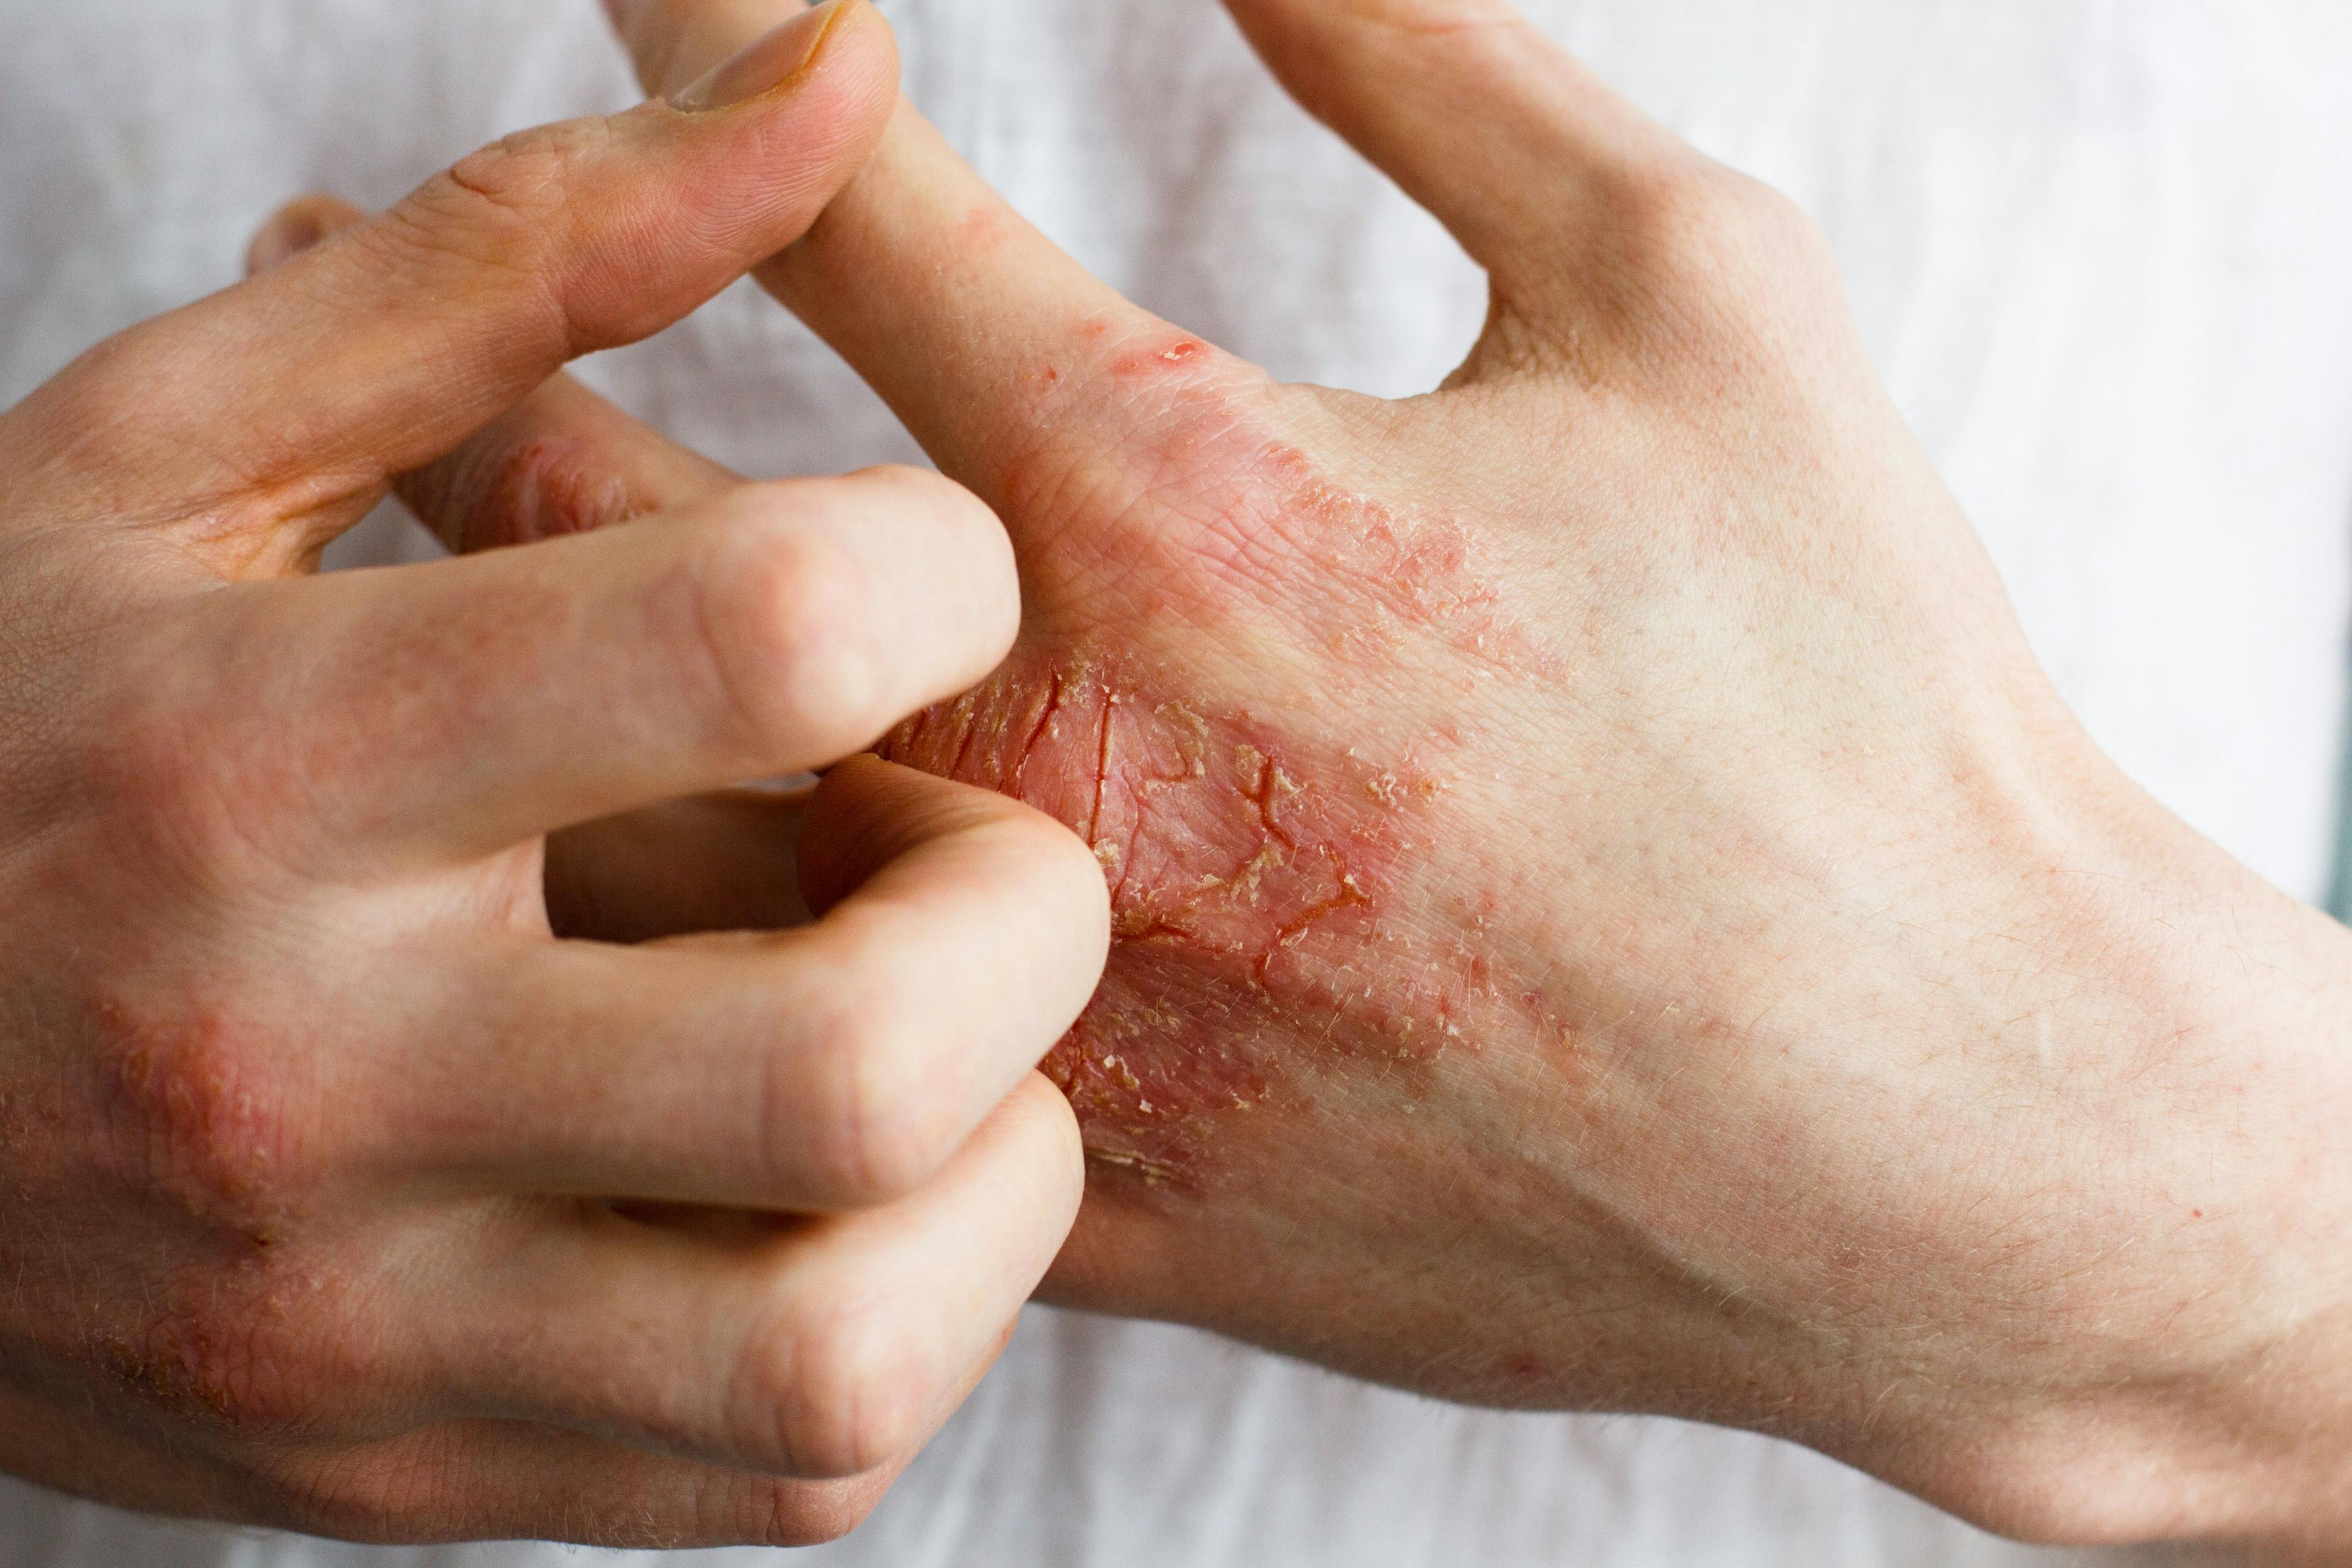 Dupixent Has Company. The FDA Has Approved Another Biologic for the Treatment of Atopic Dermatitis.